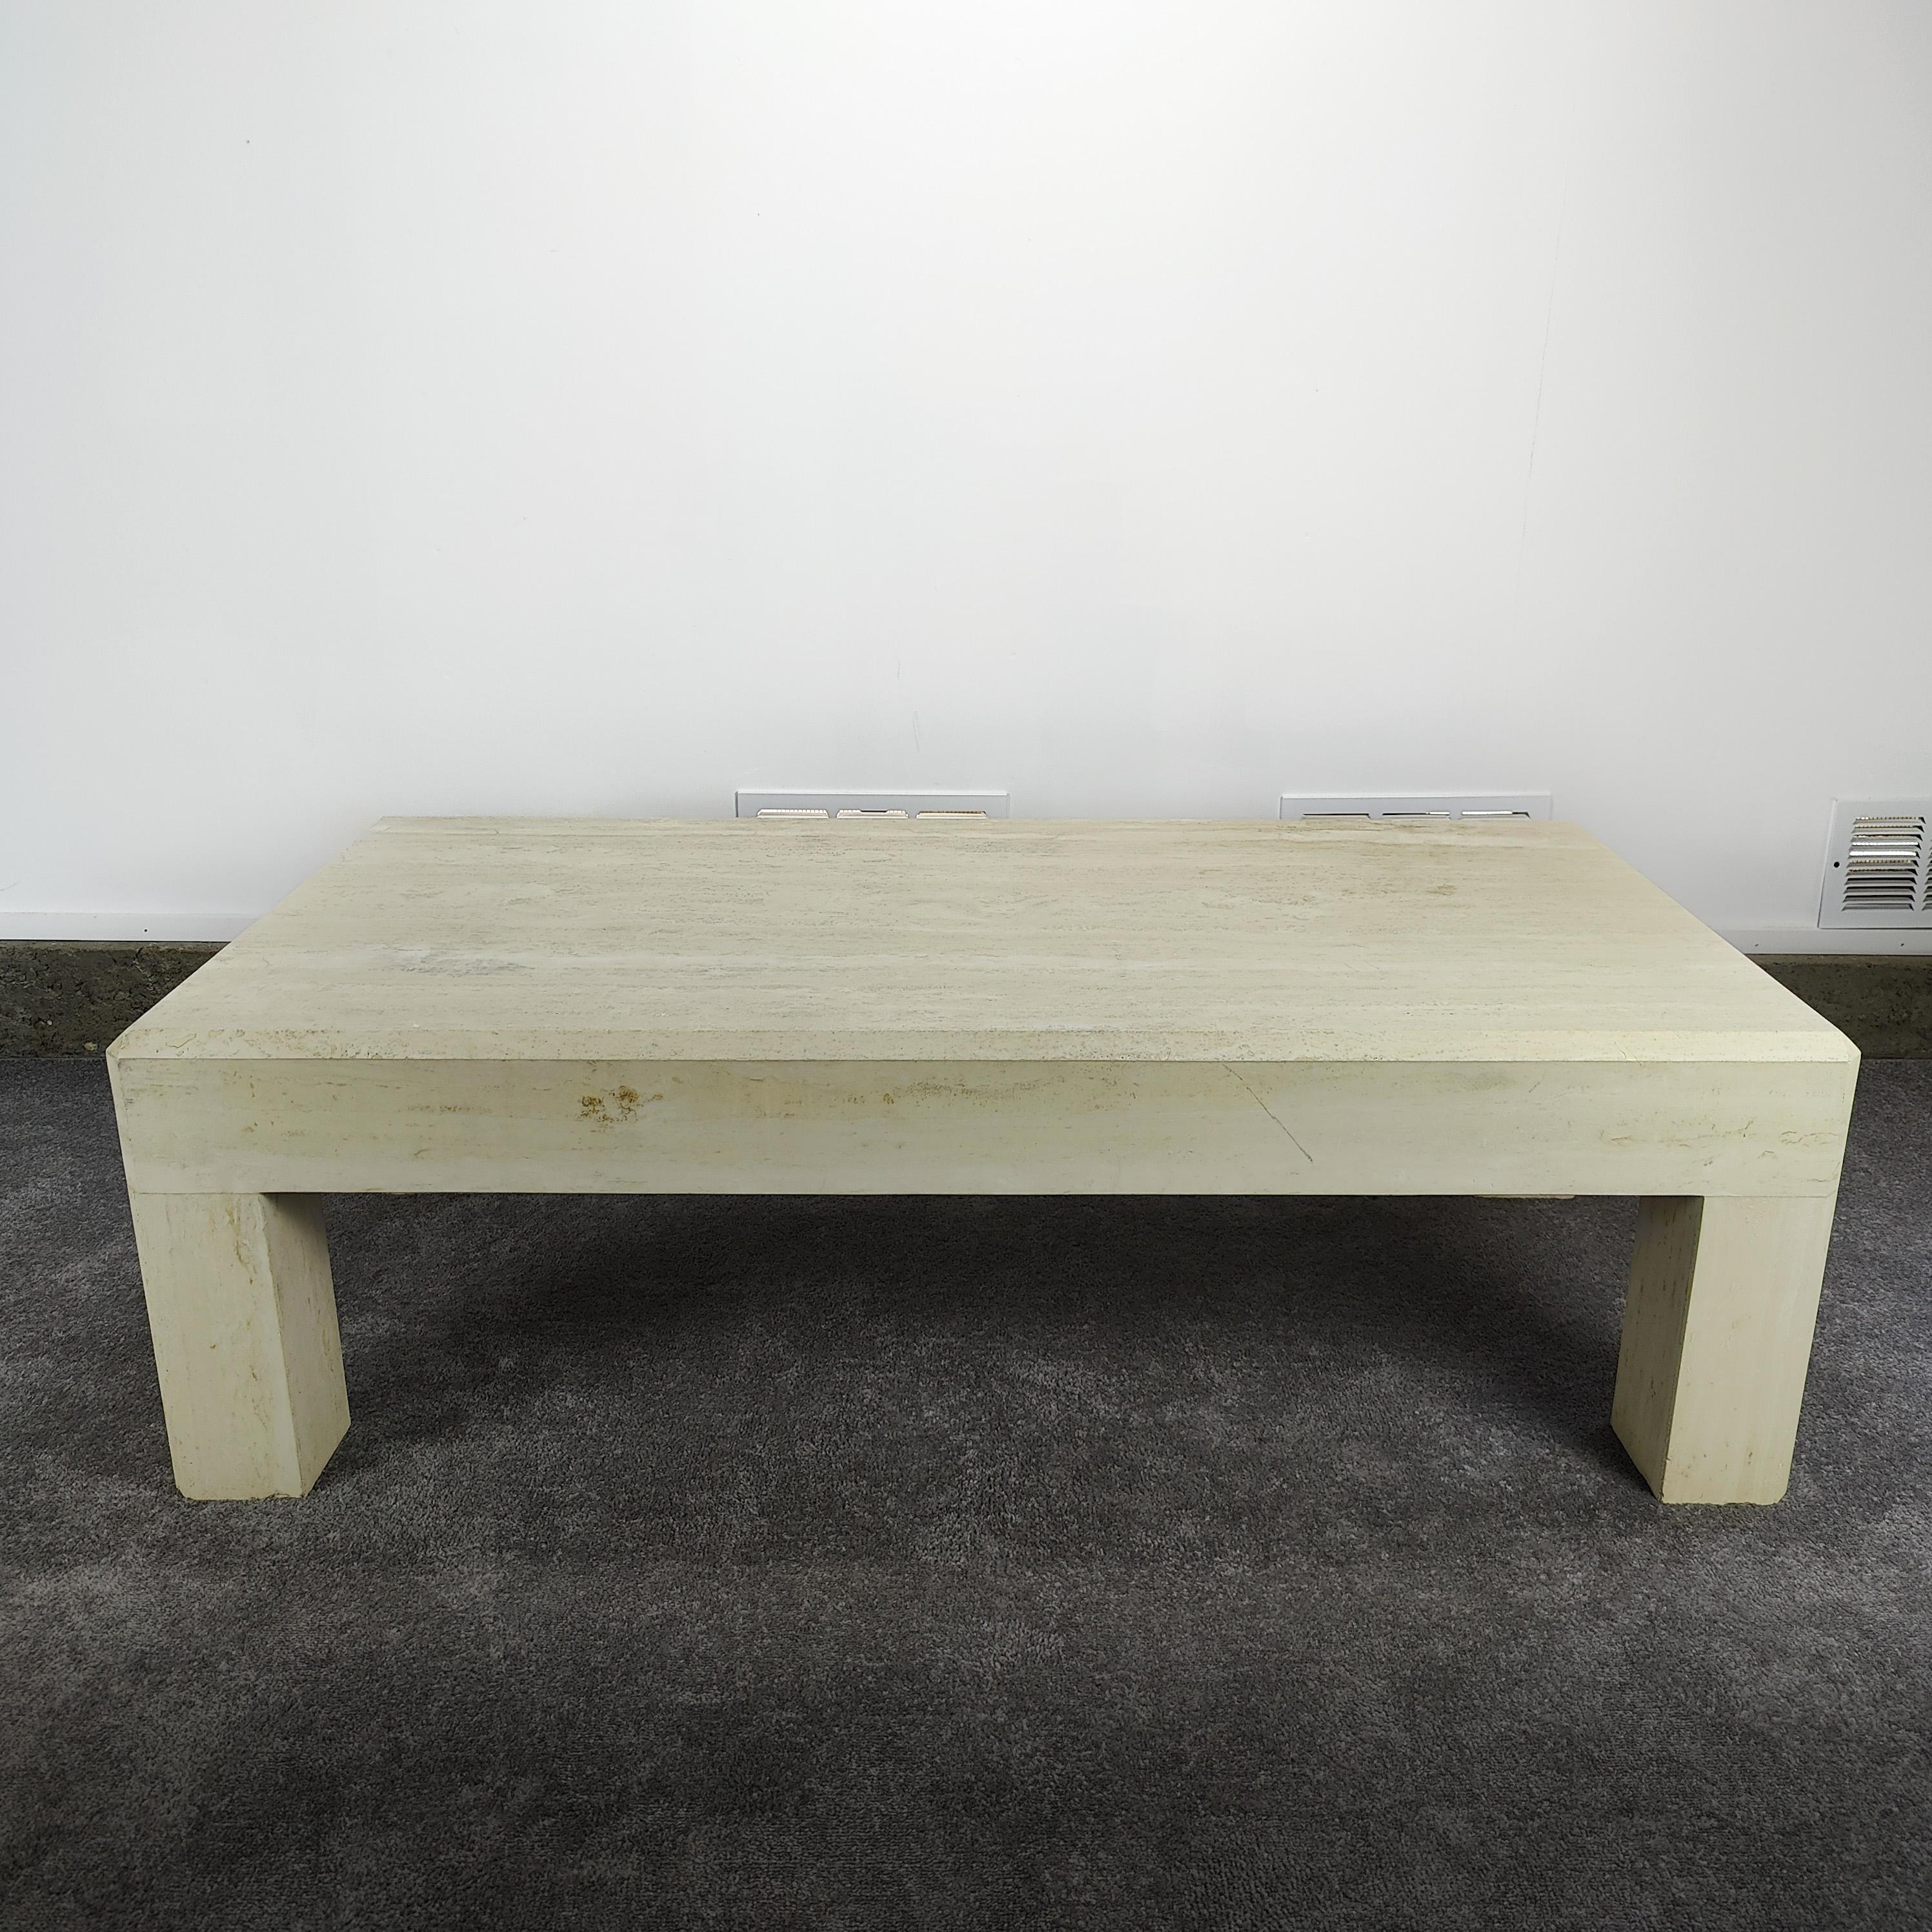 Great condition for its age with apropiate wear. Measures approximately 60x30x18h. Lovely minimalistic/nuetral tones for your place! More on the off-white color. If you have any questions, please feel free to reach out!